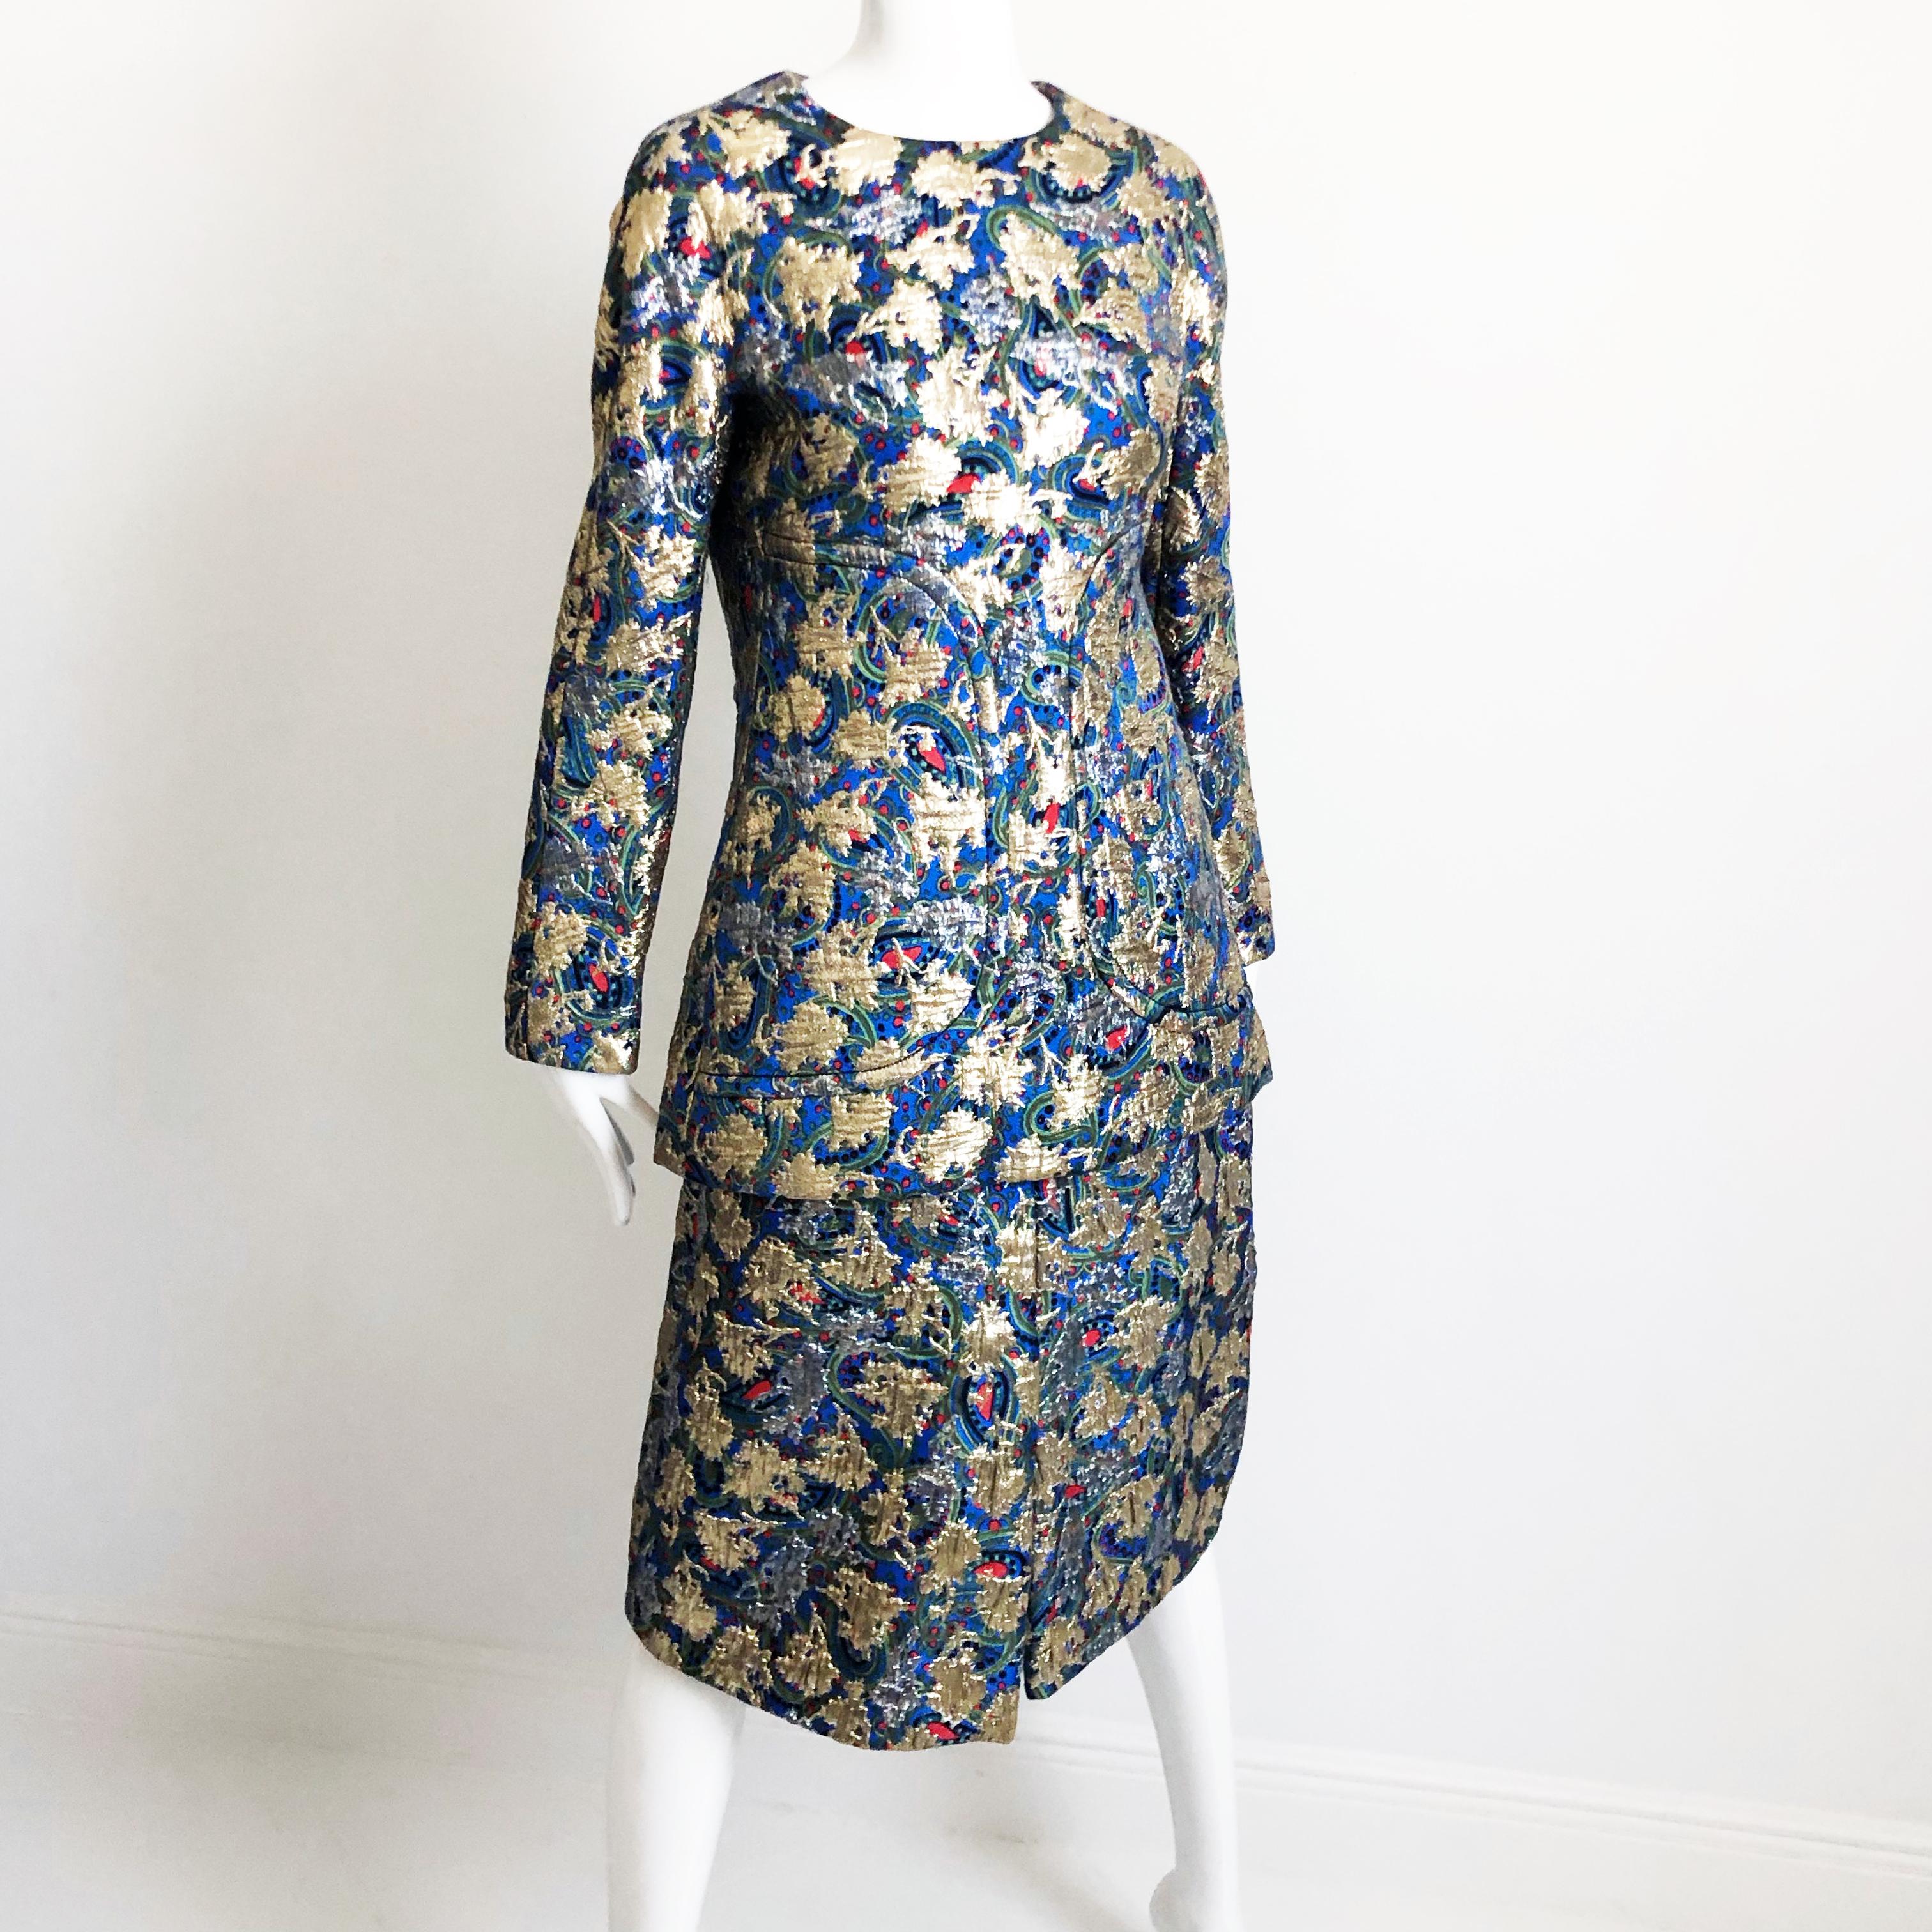 Galanos Metallic Brocade Suit 3pc Top, Long Vest and Skirt Vintage 60s Retro  For Sale 5